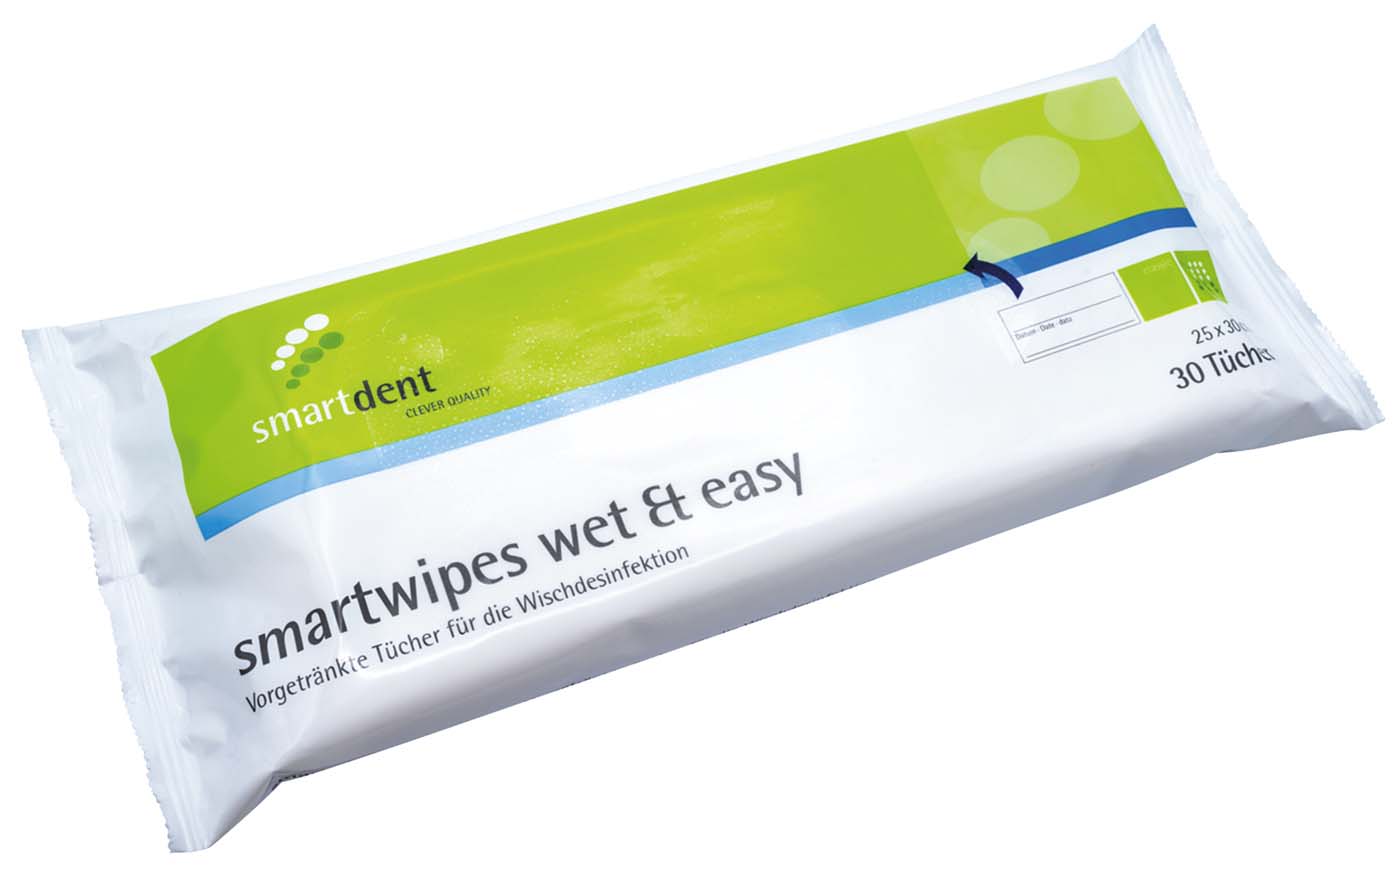 smartwipes wet & easy  Packung  30 Stück 25 x 30 cm